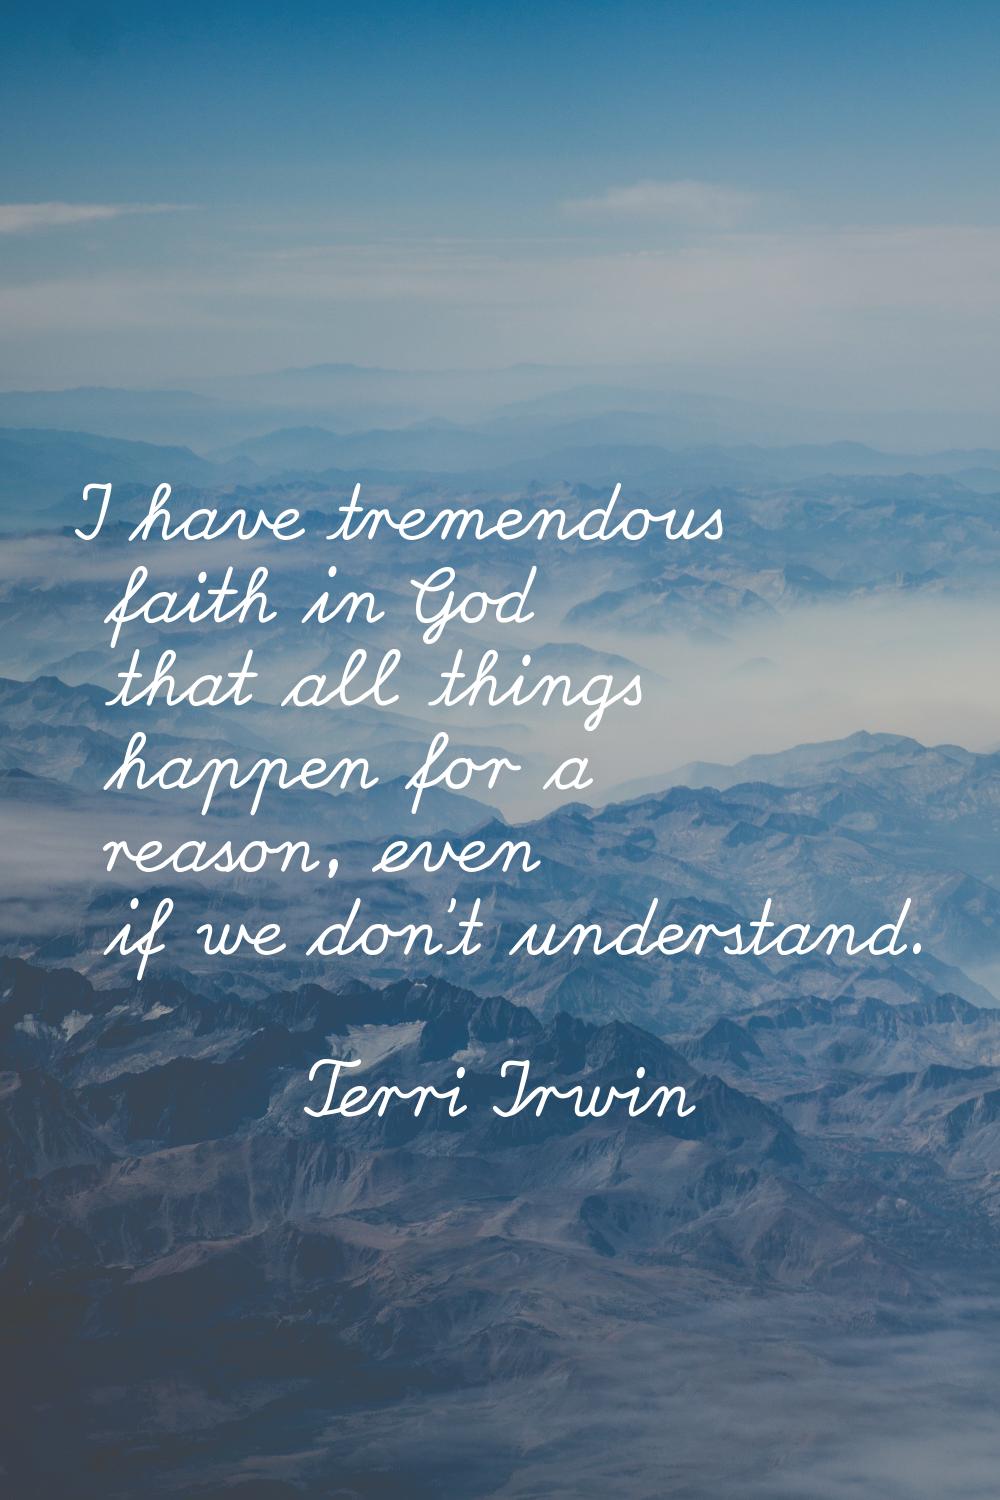 I have tremendous faith in God that all things happen for a reason, even if we don't understand.